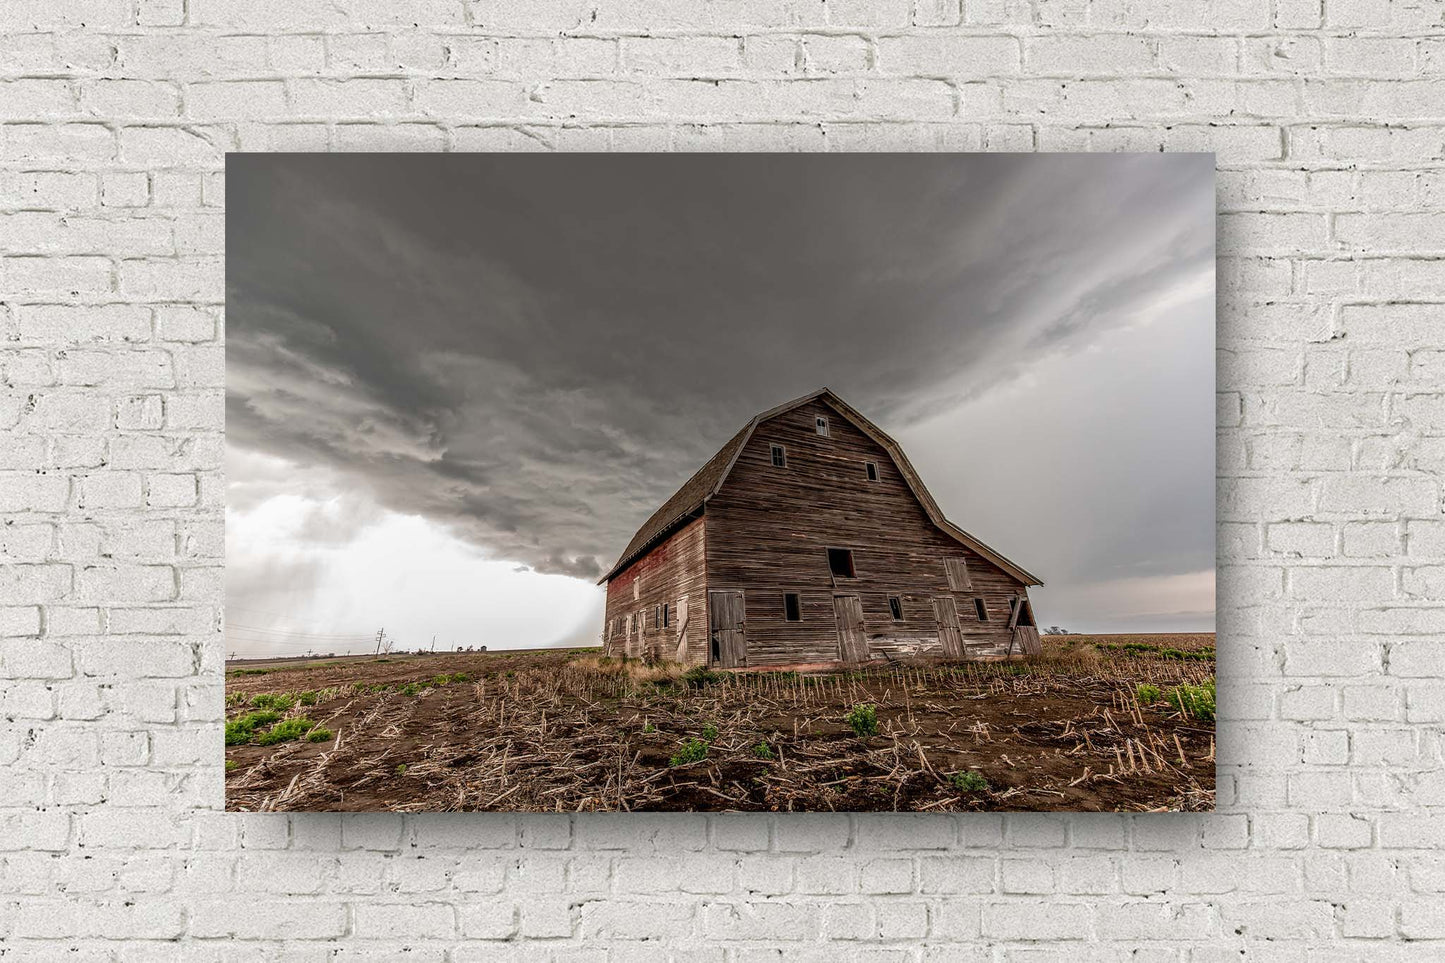 Country aluminum metal print of a storm advancing over an old red Amish style barn in a field on a stormy spring day in Nebraska by Sean Ramsey of Southern Plains Photography.